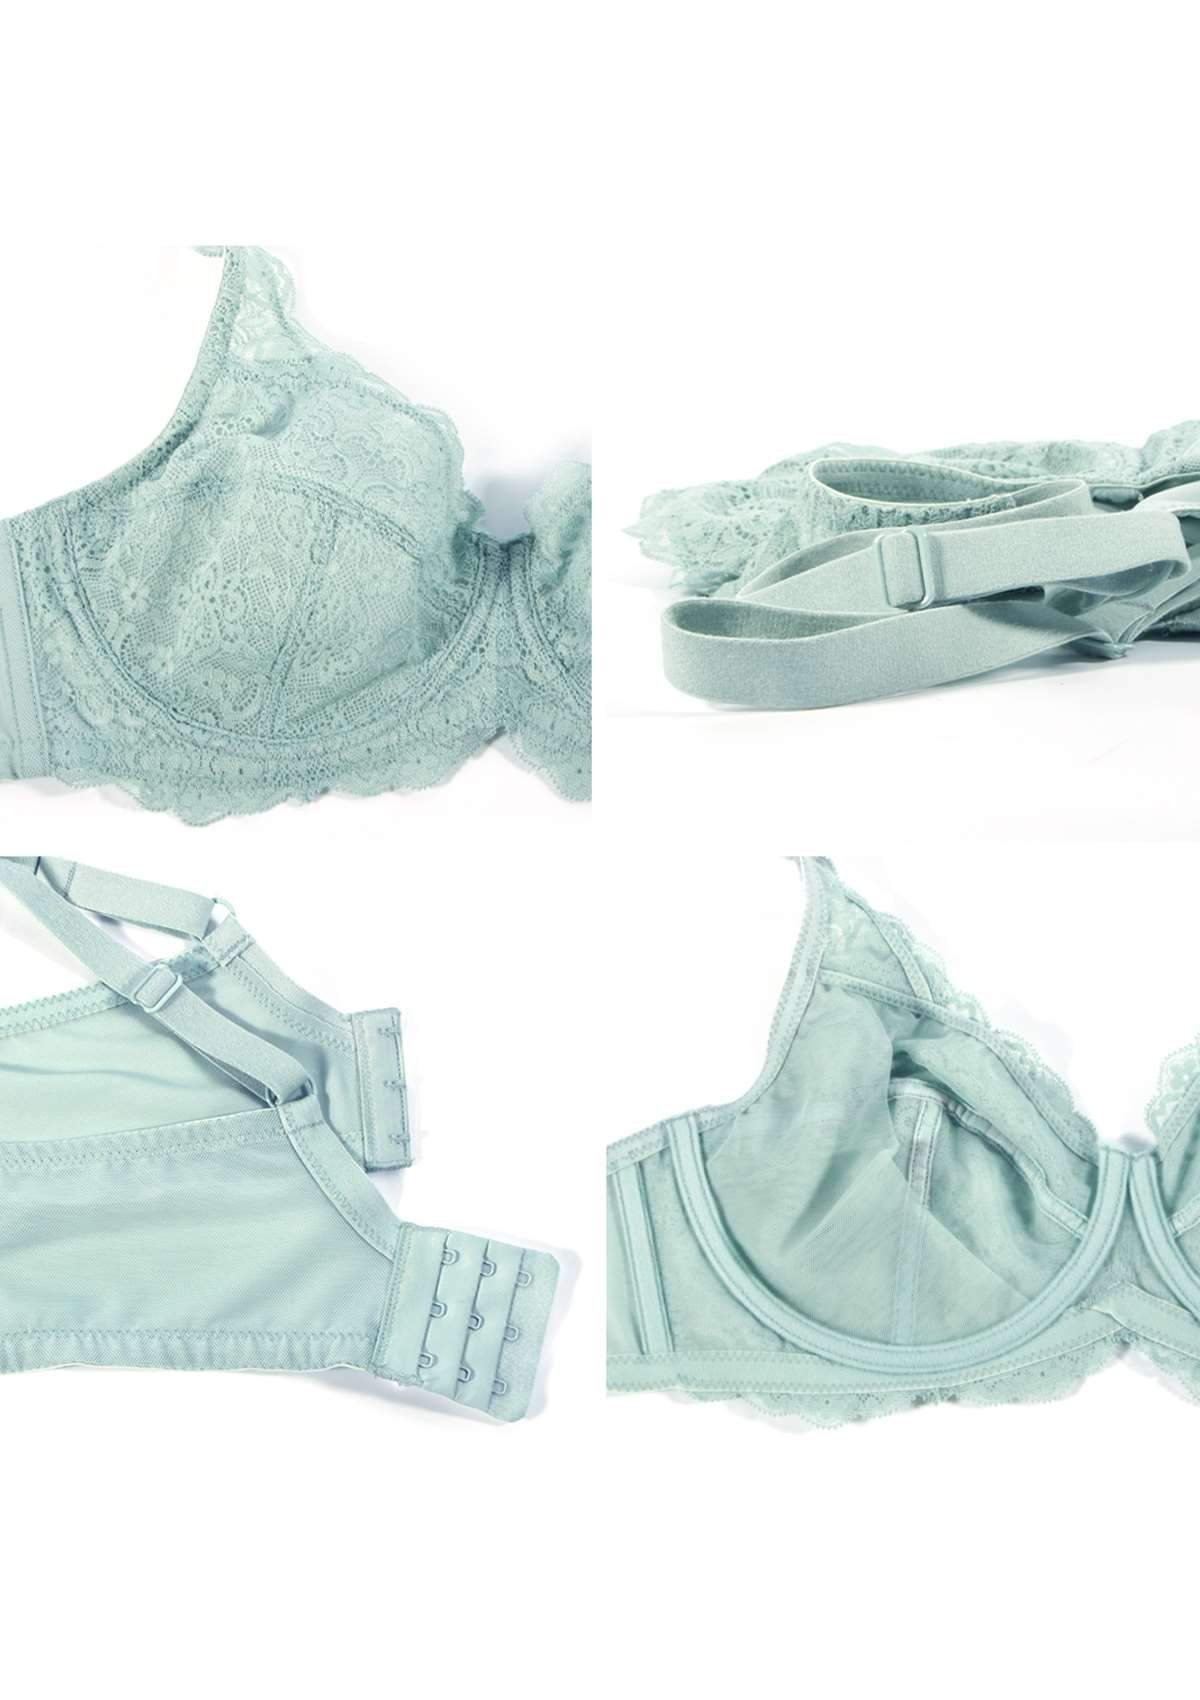 HSIA All-Over Floral Lace: Best Bra For Elderly With Sagging Breasts - Pewter Blue / 40 / C